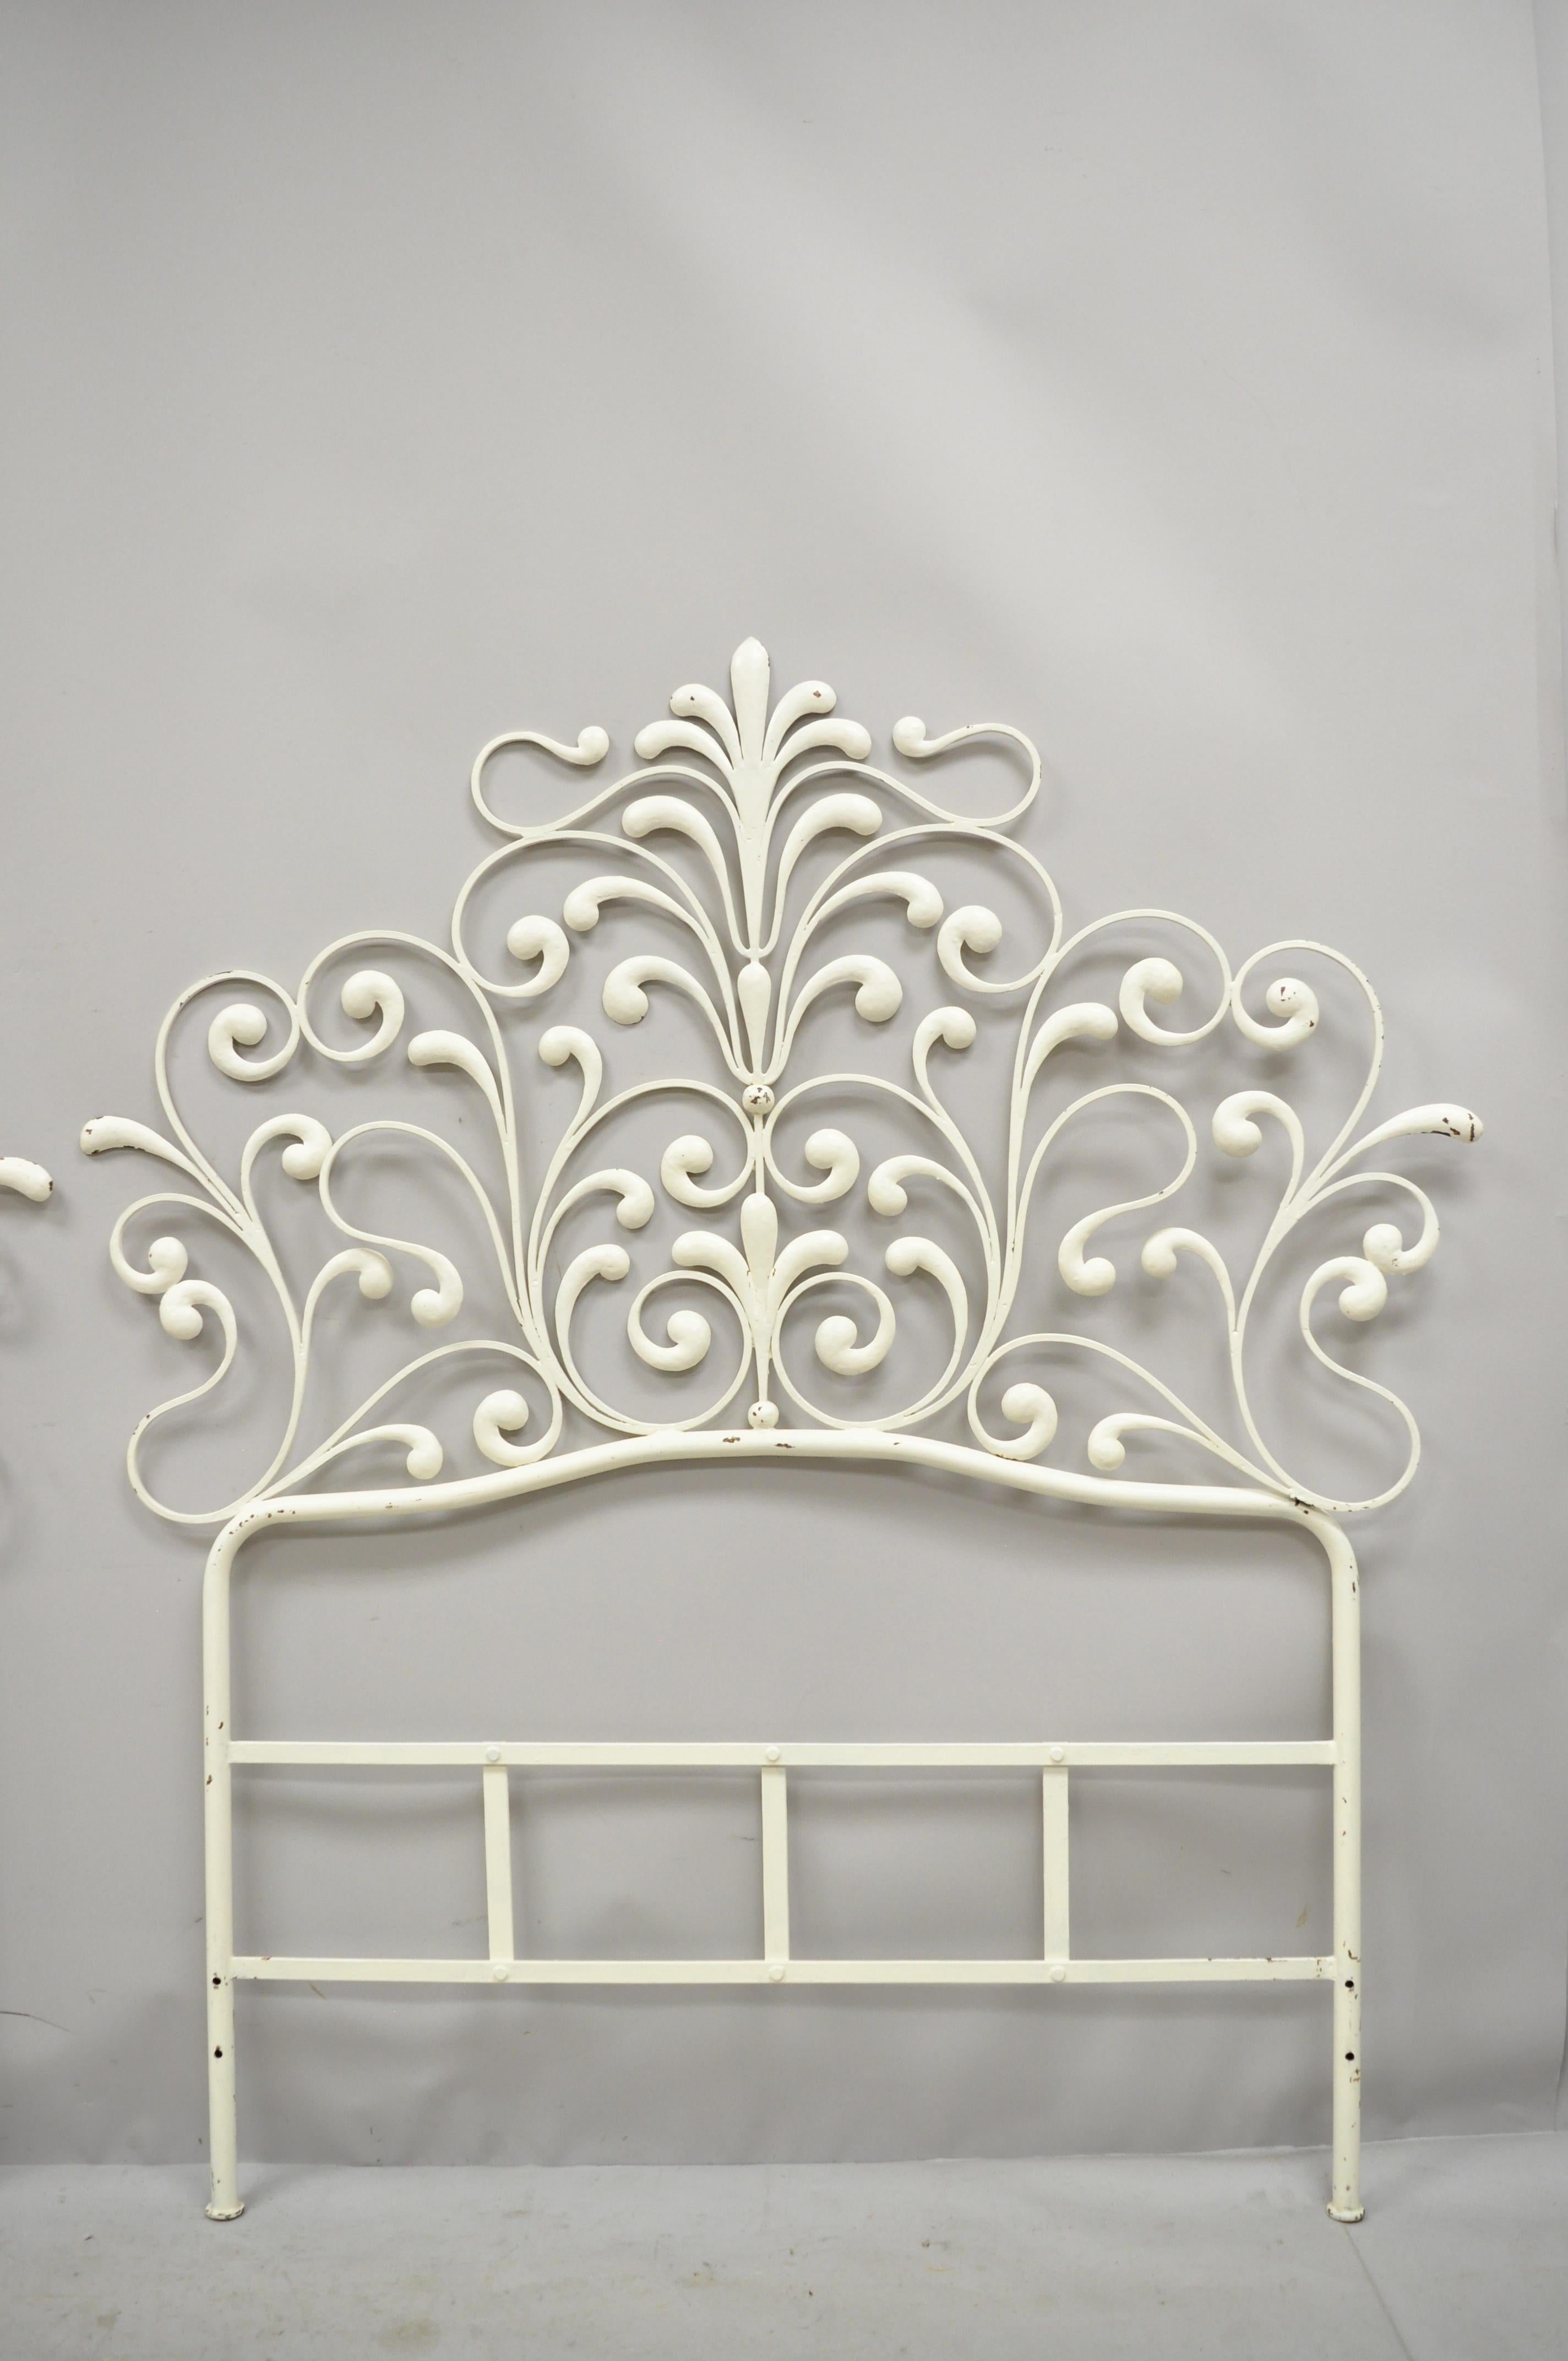 Pair of vintage Italian Rococo Hollywood Regency ornate iron twin single bed headboards. Item features ornate wrought iron frames, very nice vintage item, great style and form circa mid to late 20th century. Measurements: 53